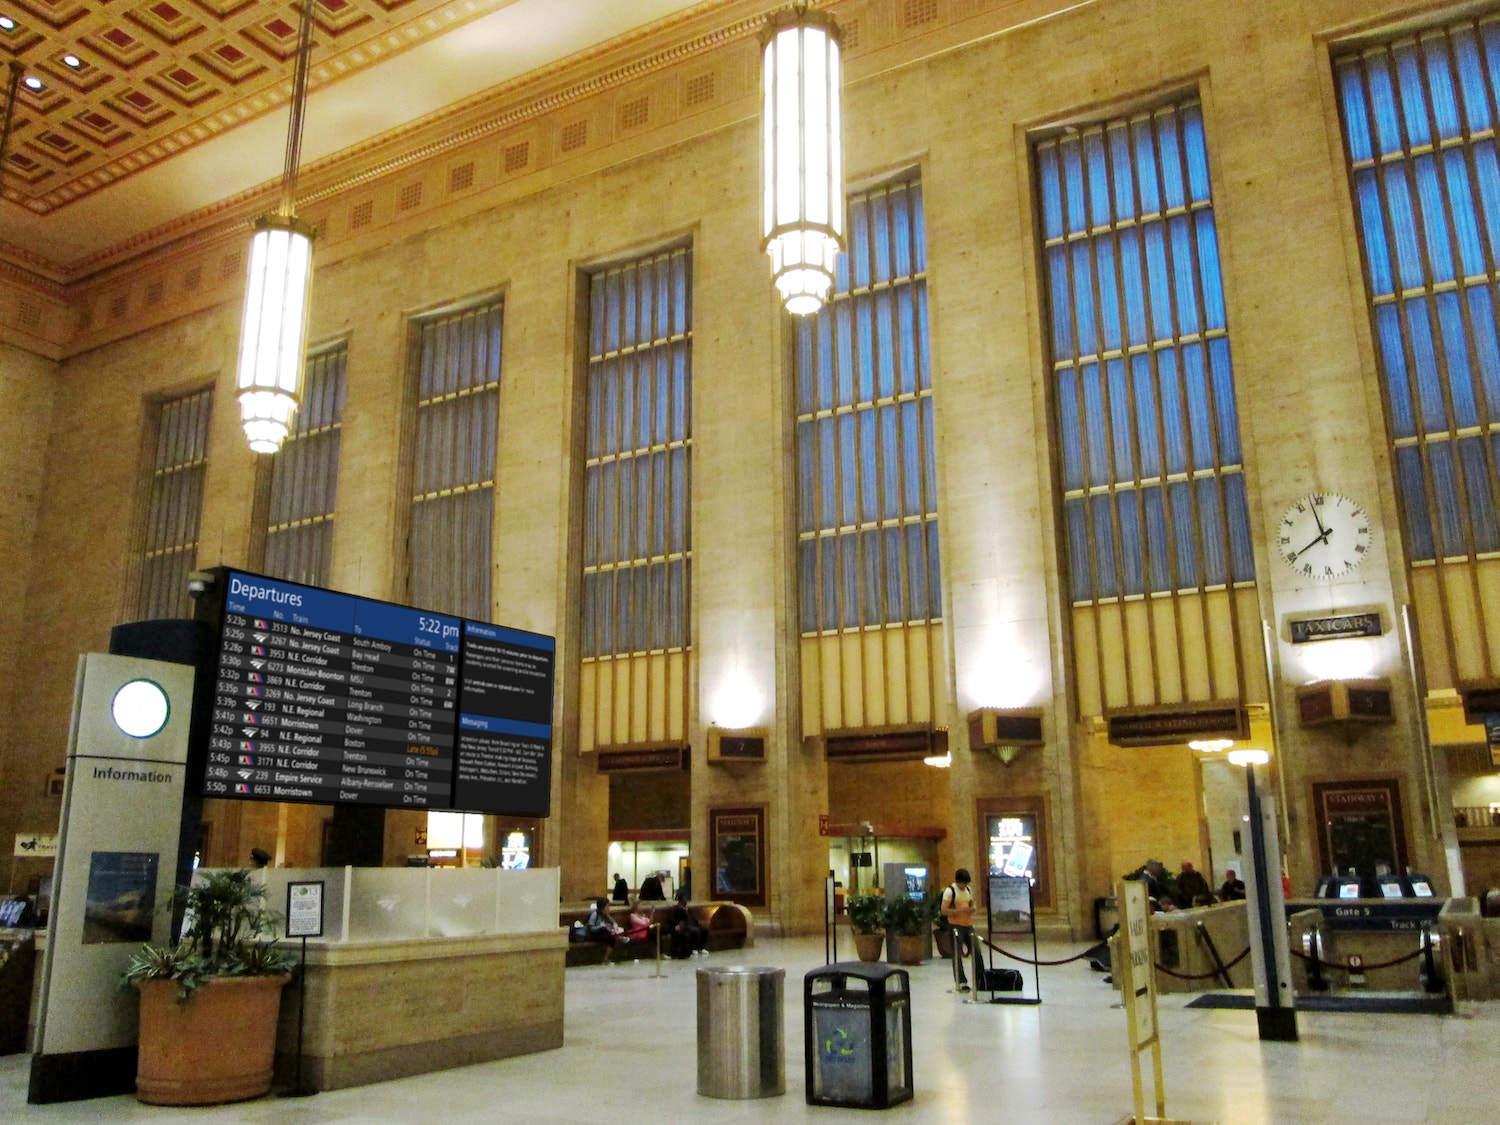 A mockup of 30th Street Station with a digital screen with a darker, more understated design. The sign is modern but does not call attention to itself and fits in more with the character of the building.